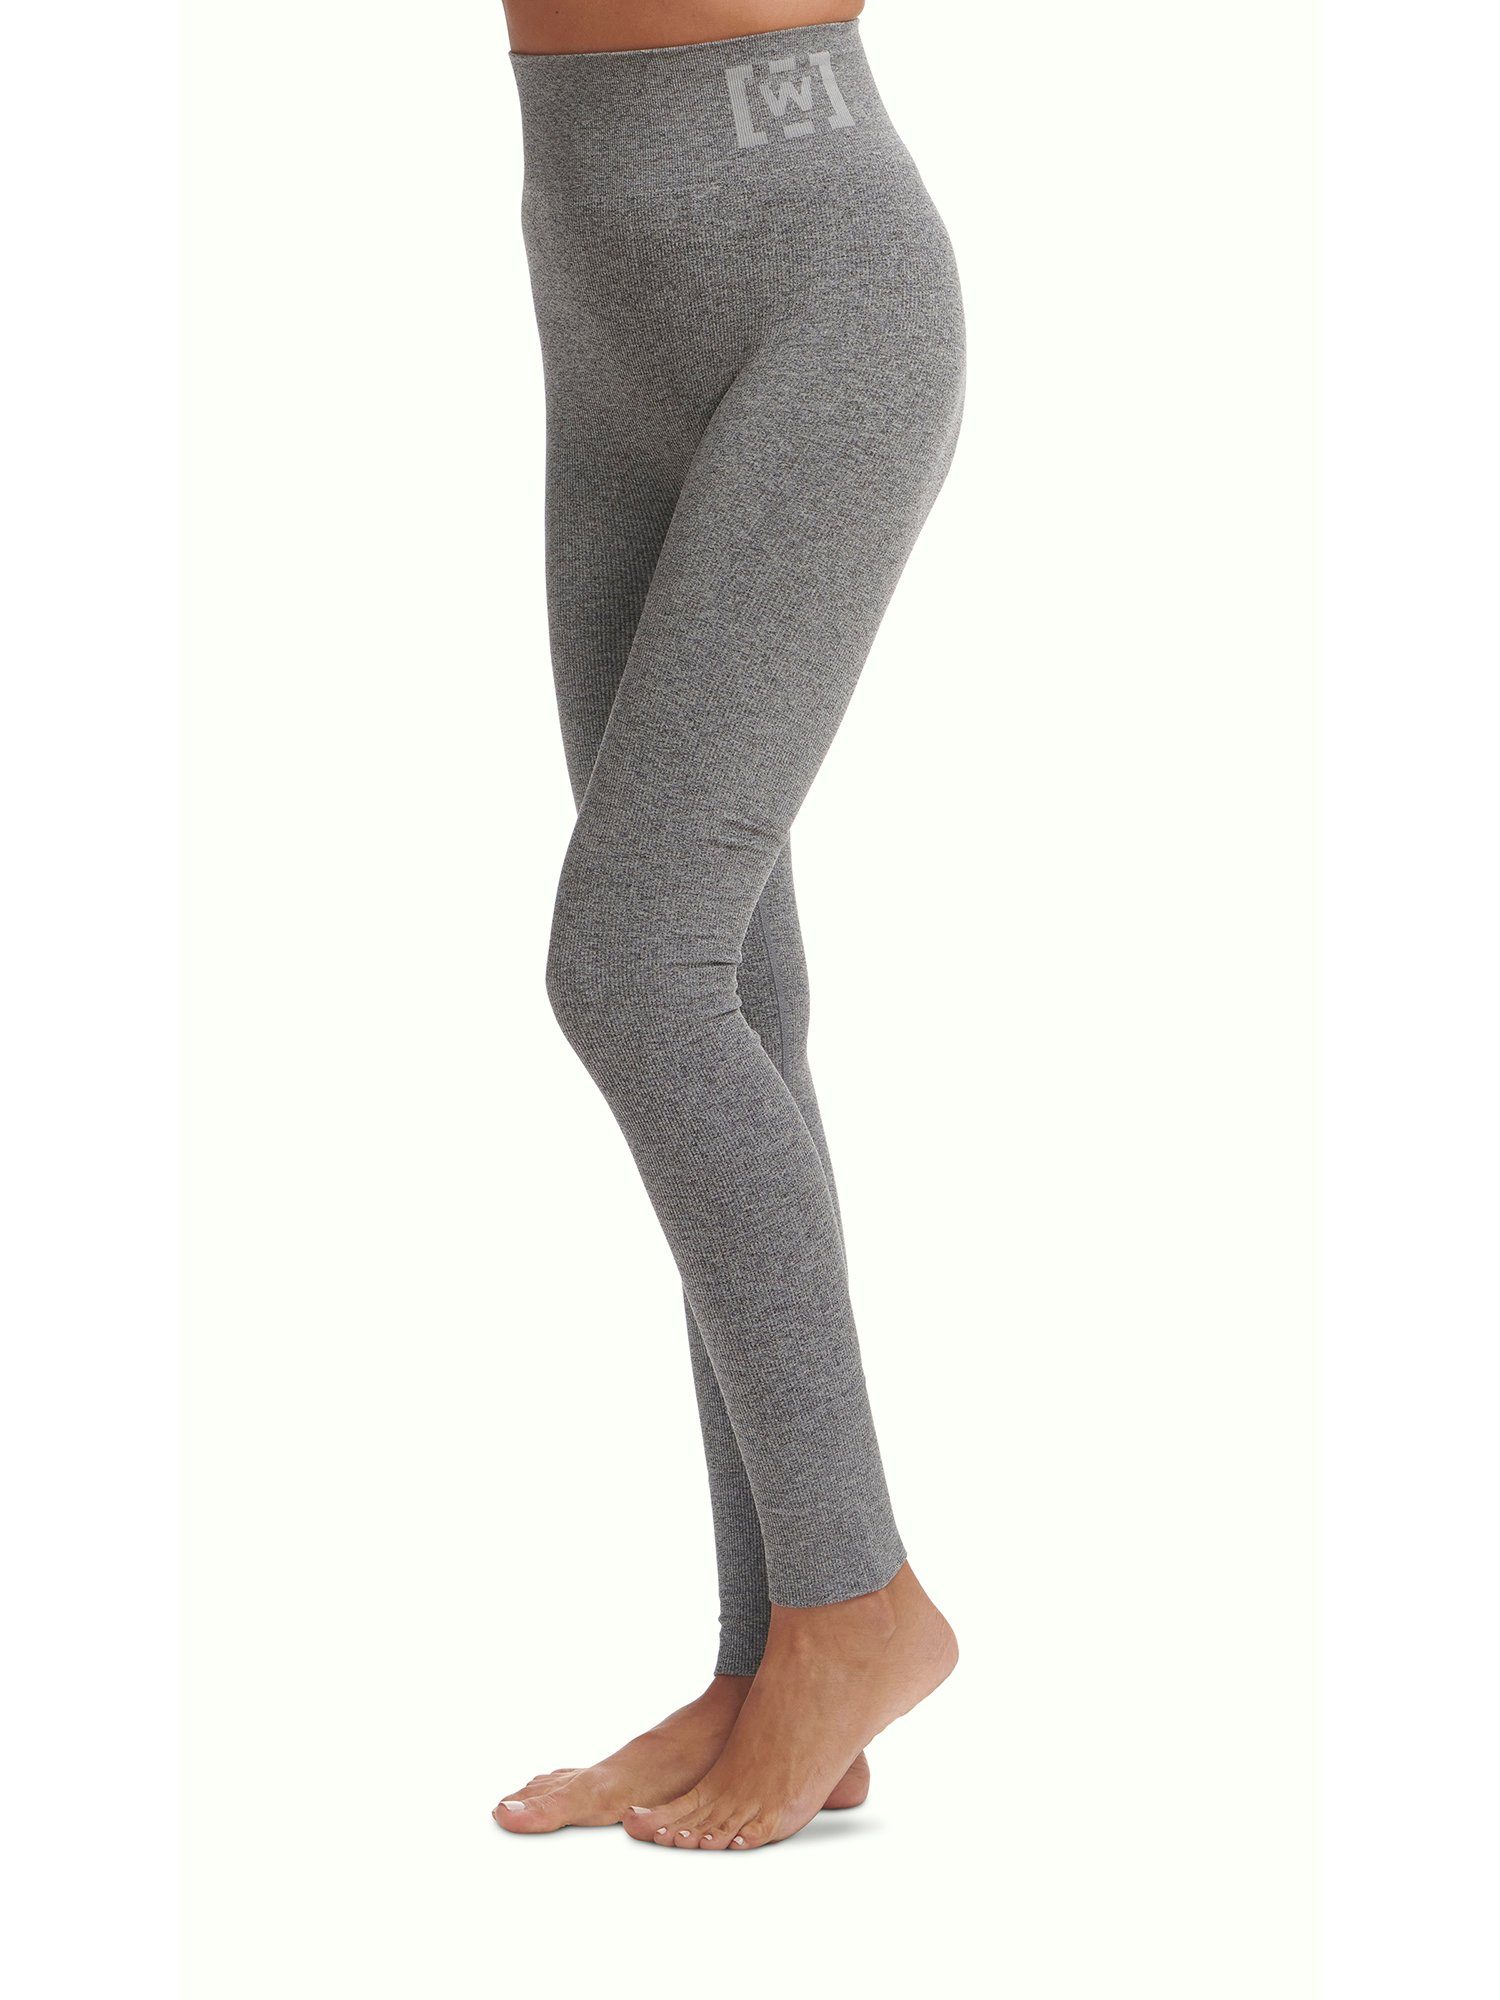 Wolford Leggings Shaping Athleisure